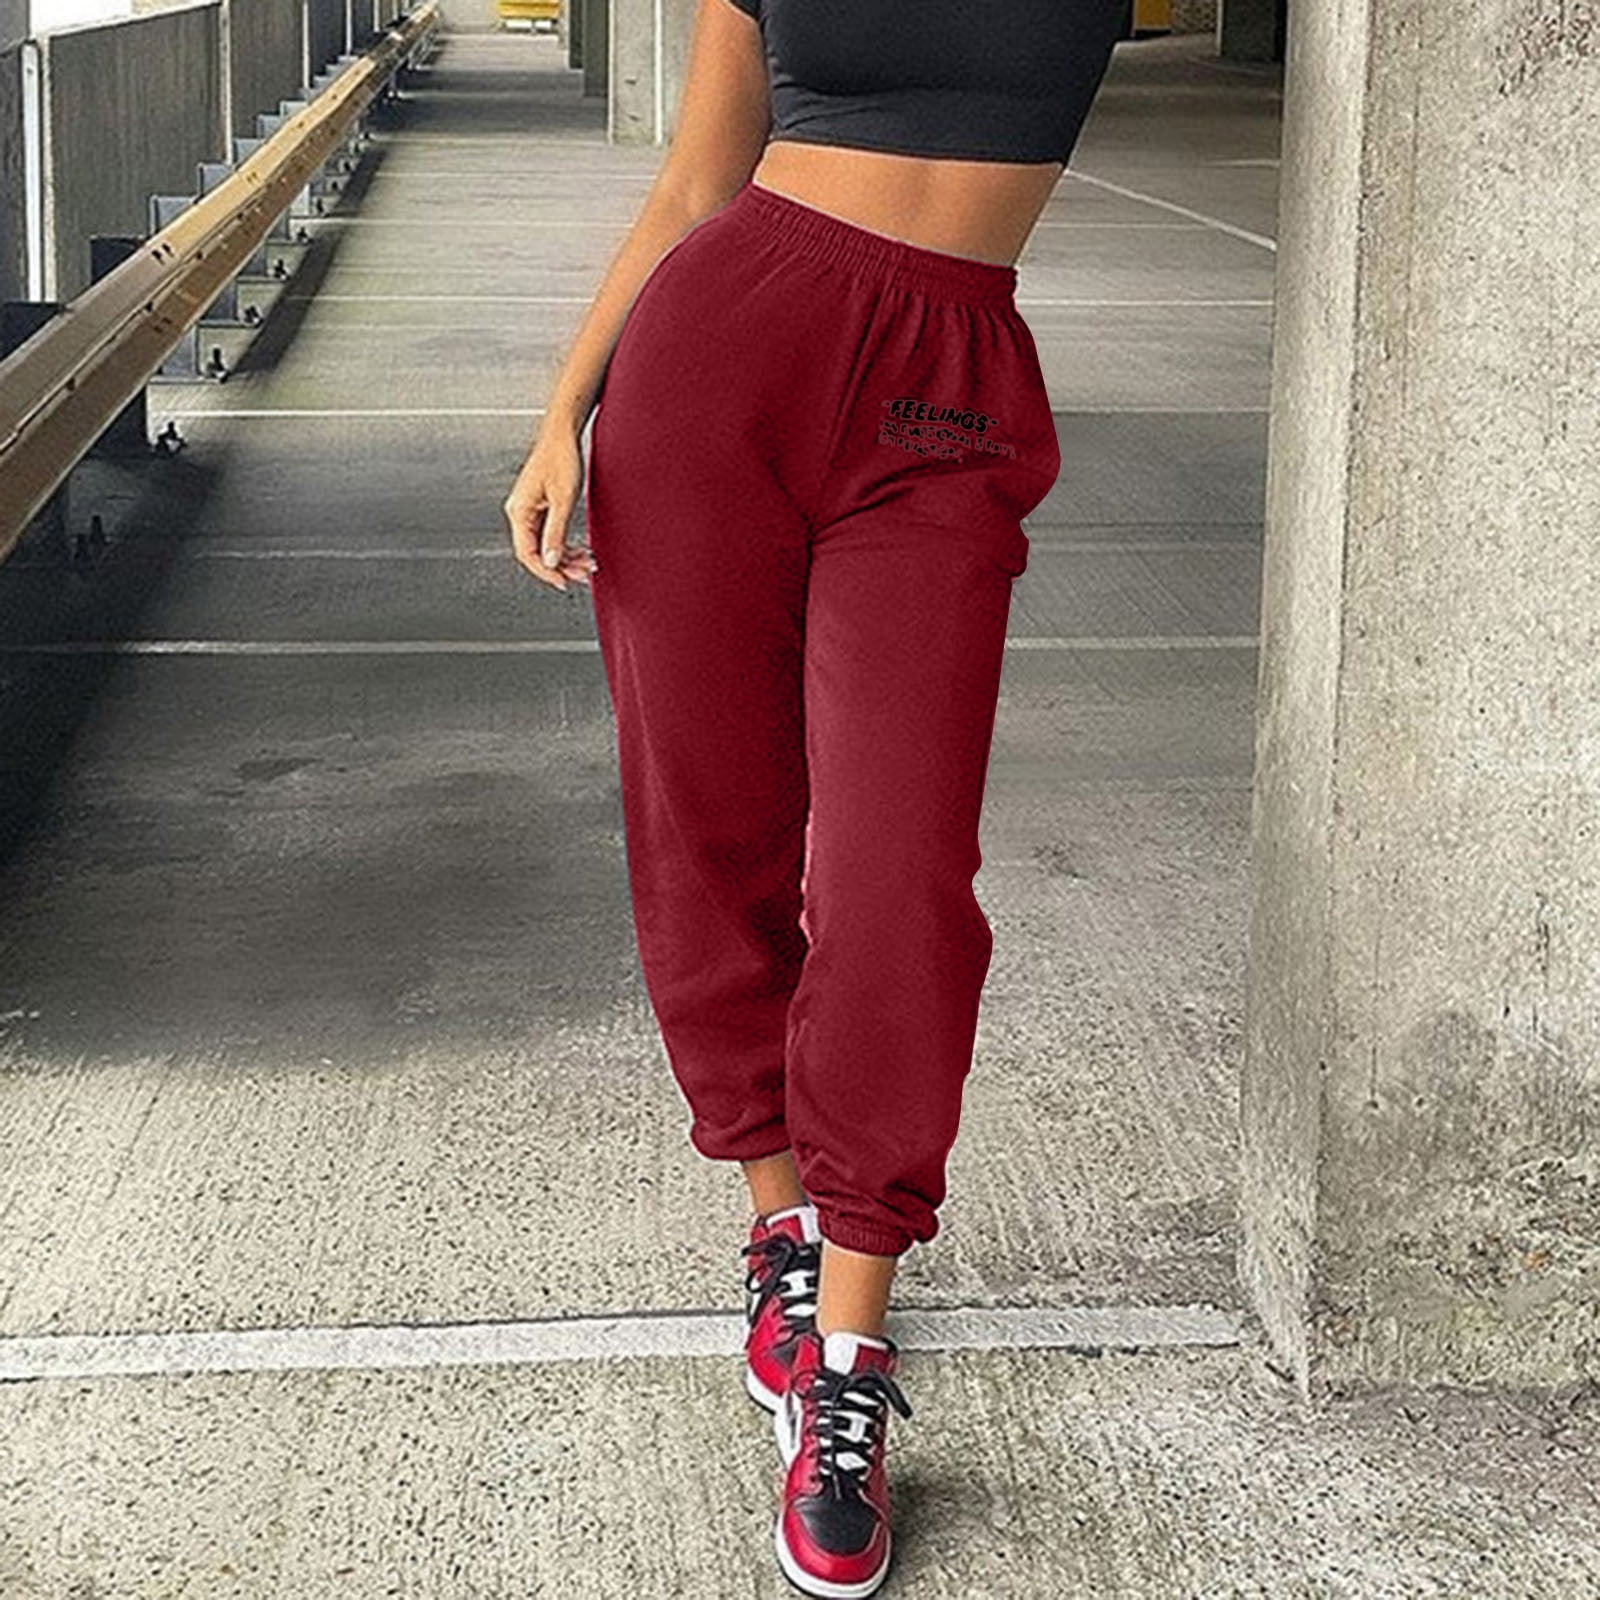 Gubotare Pants For Womens Womens Pants Water Resistant Insulated Sweatpants High Waisted Joggers with Pockets,Red L - Walmart.com